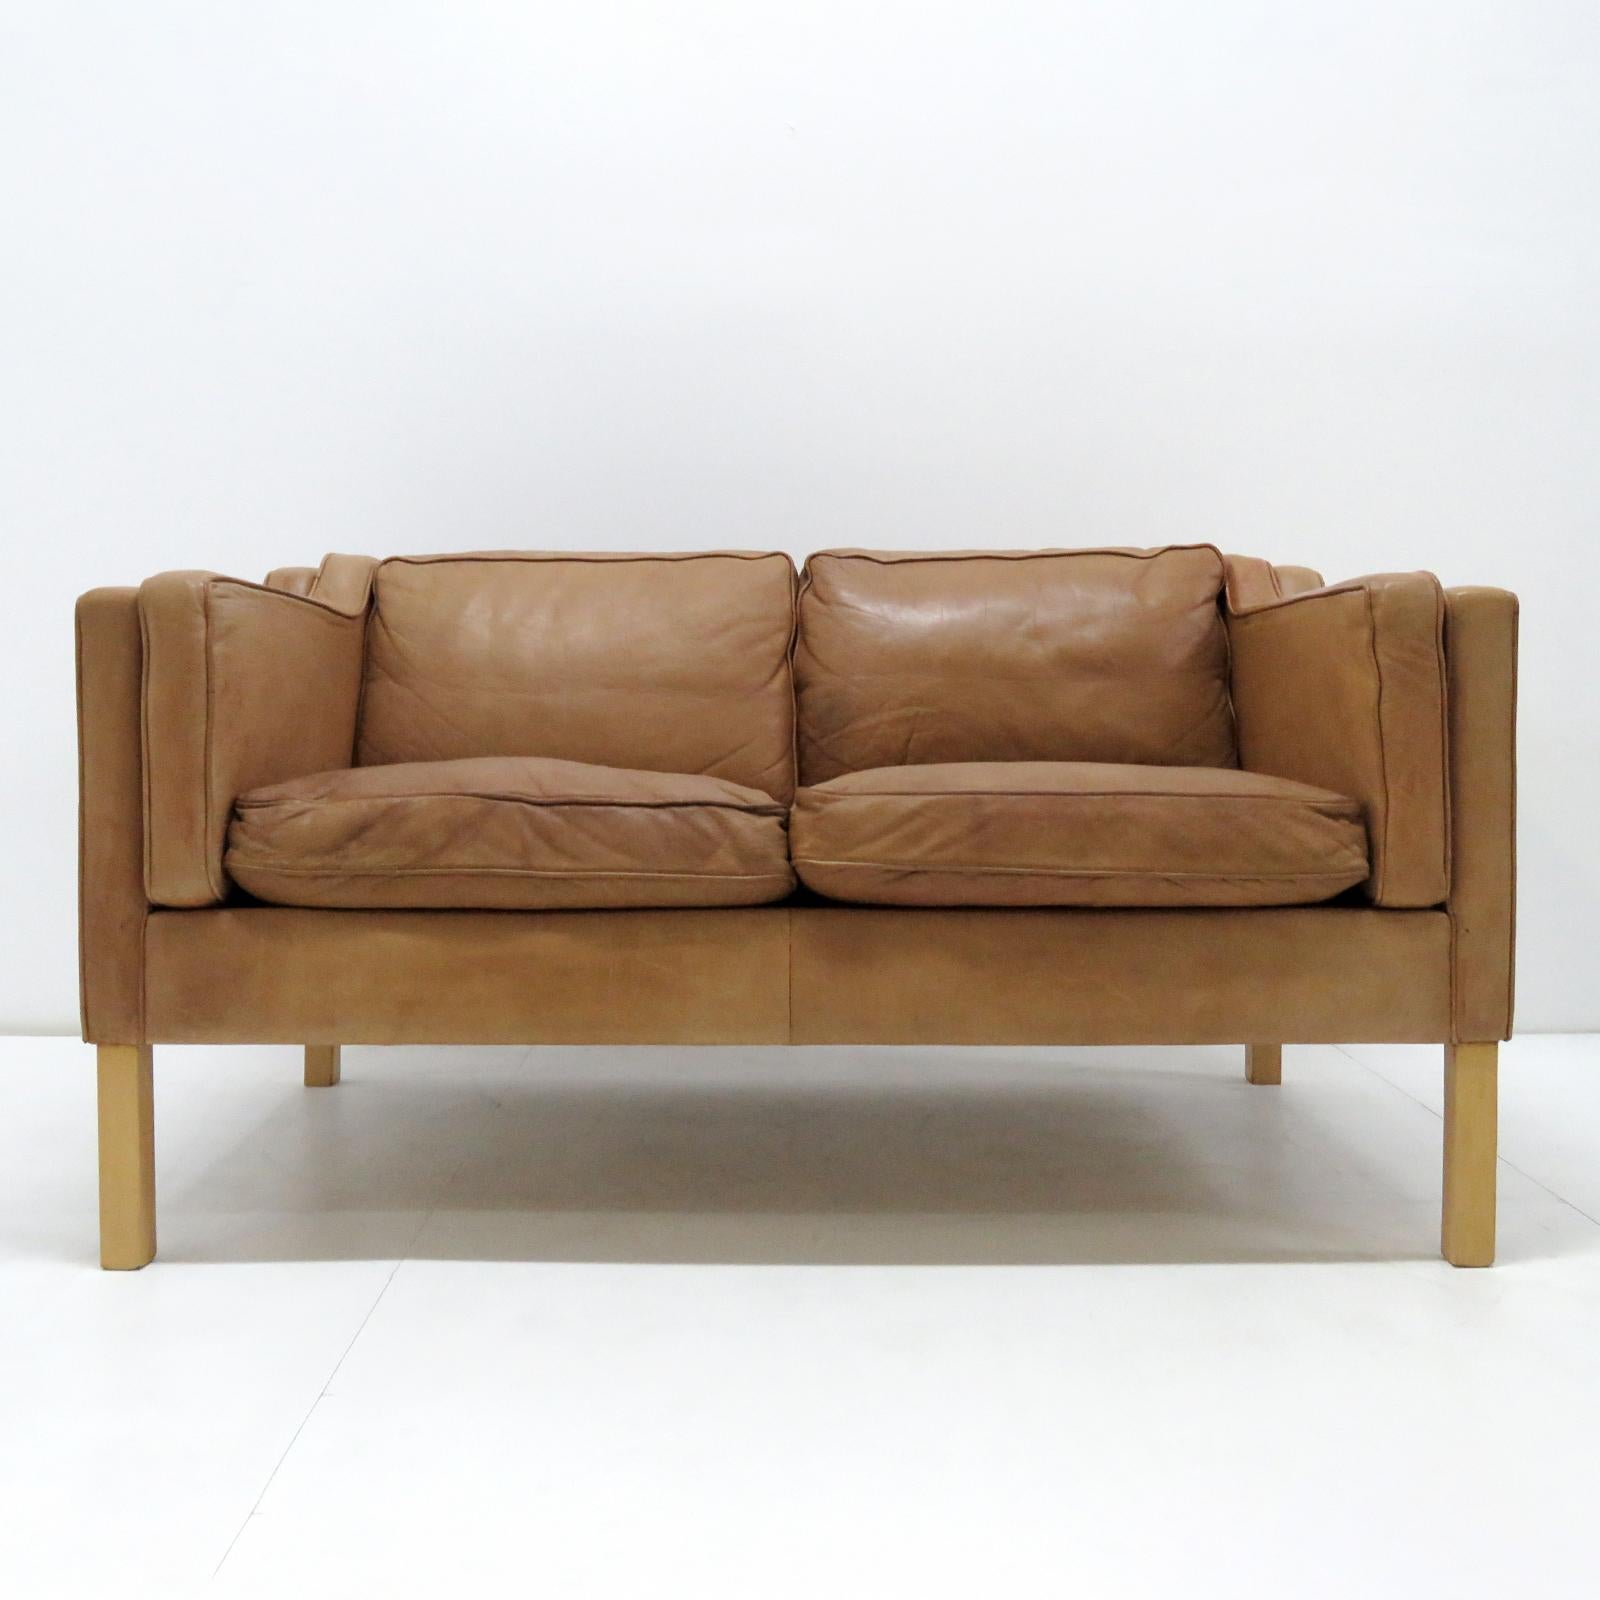 wonderful 1960s, Danish 2-seat sofa in style of Borge Mogensen, in cognac colored leather on beech frame.